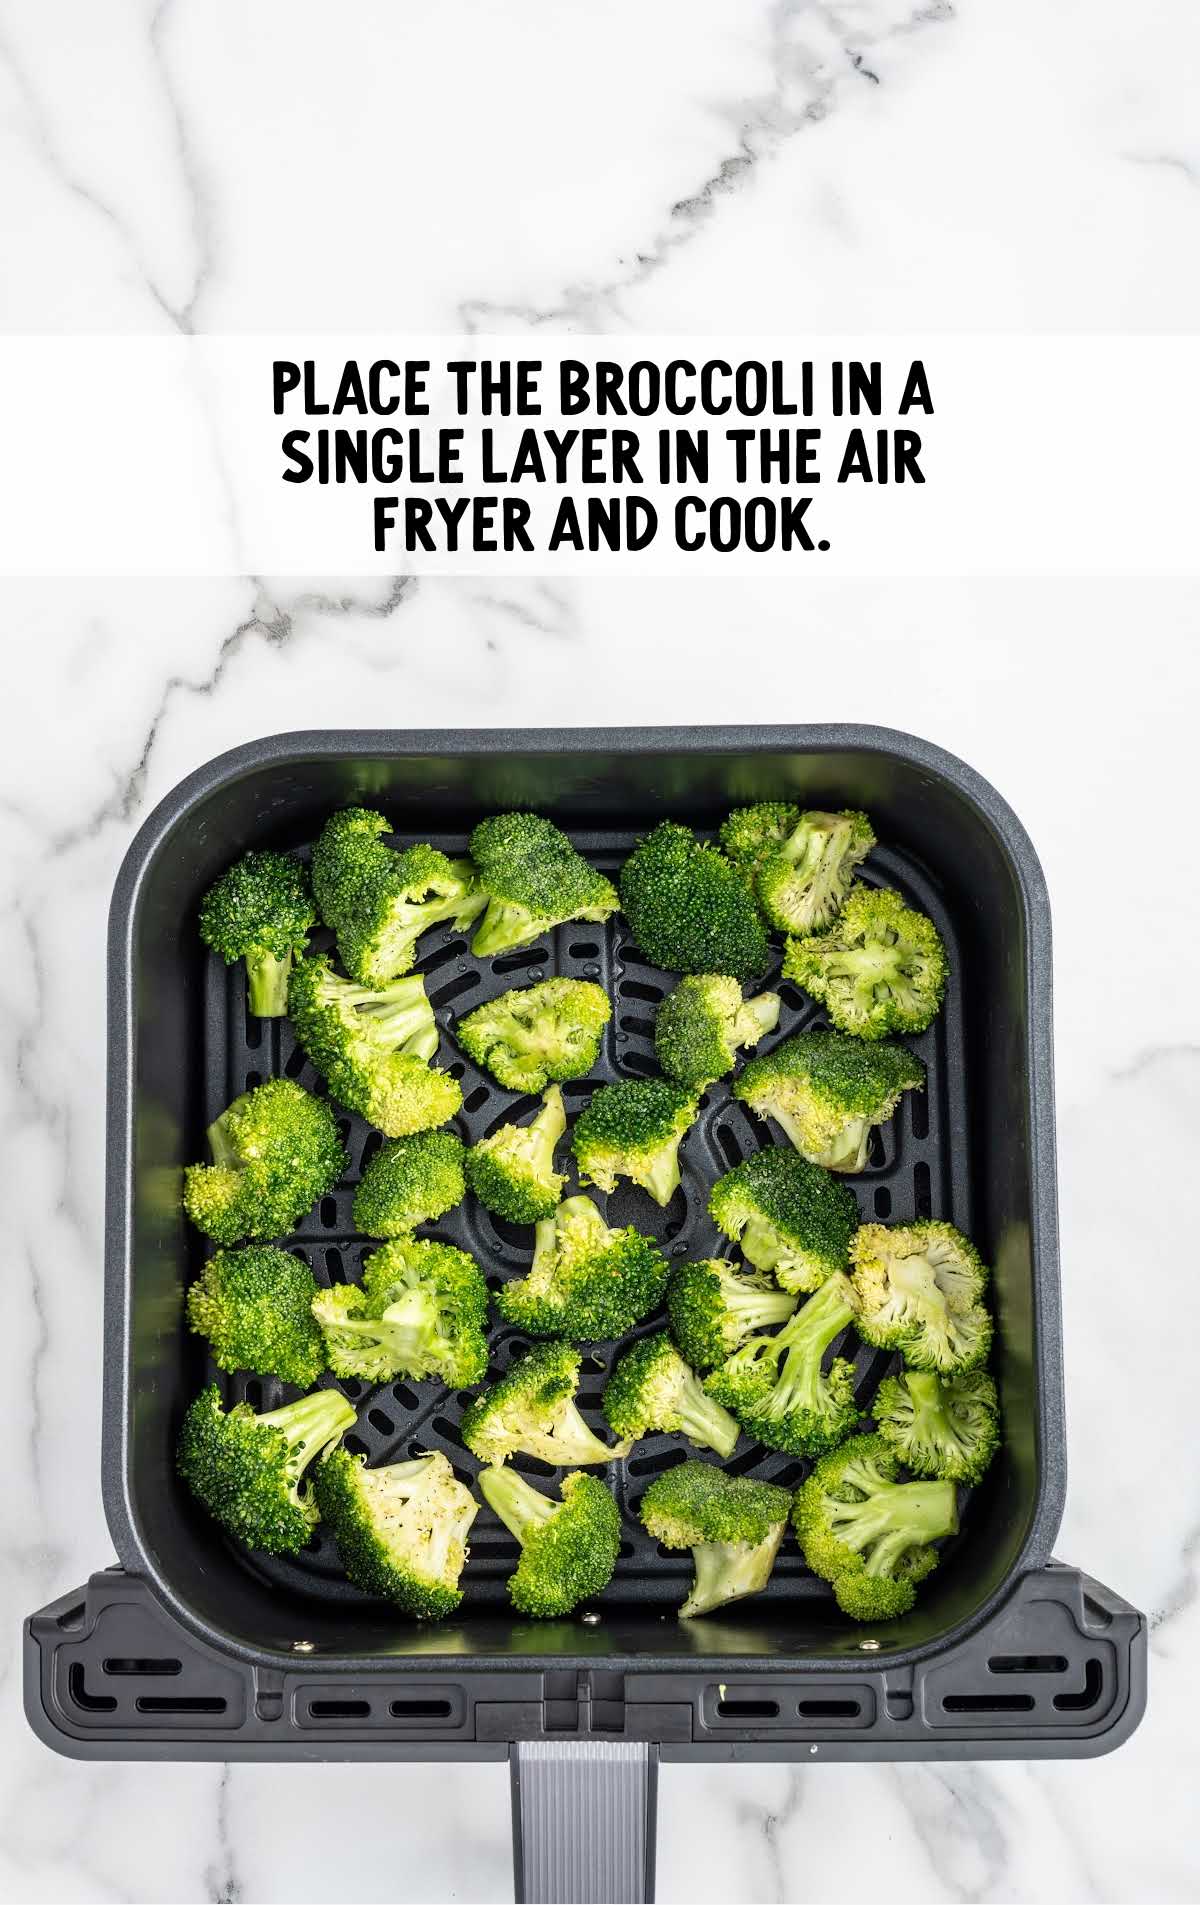 Broccoli pieces placed in a air fryer and cooked